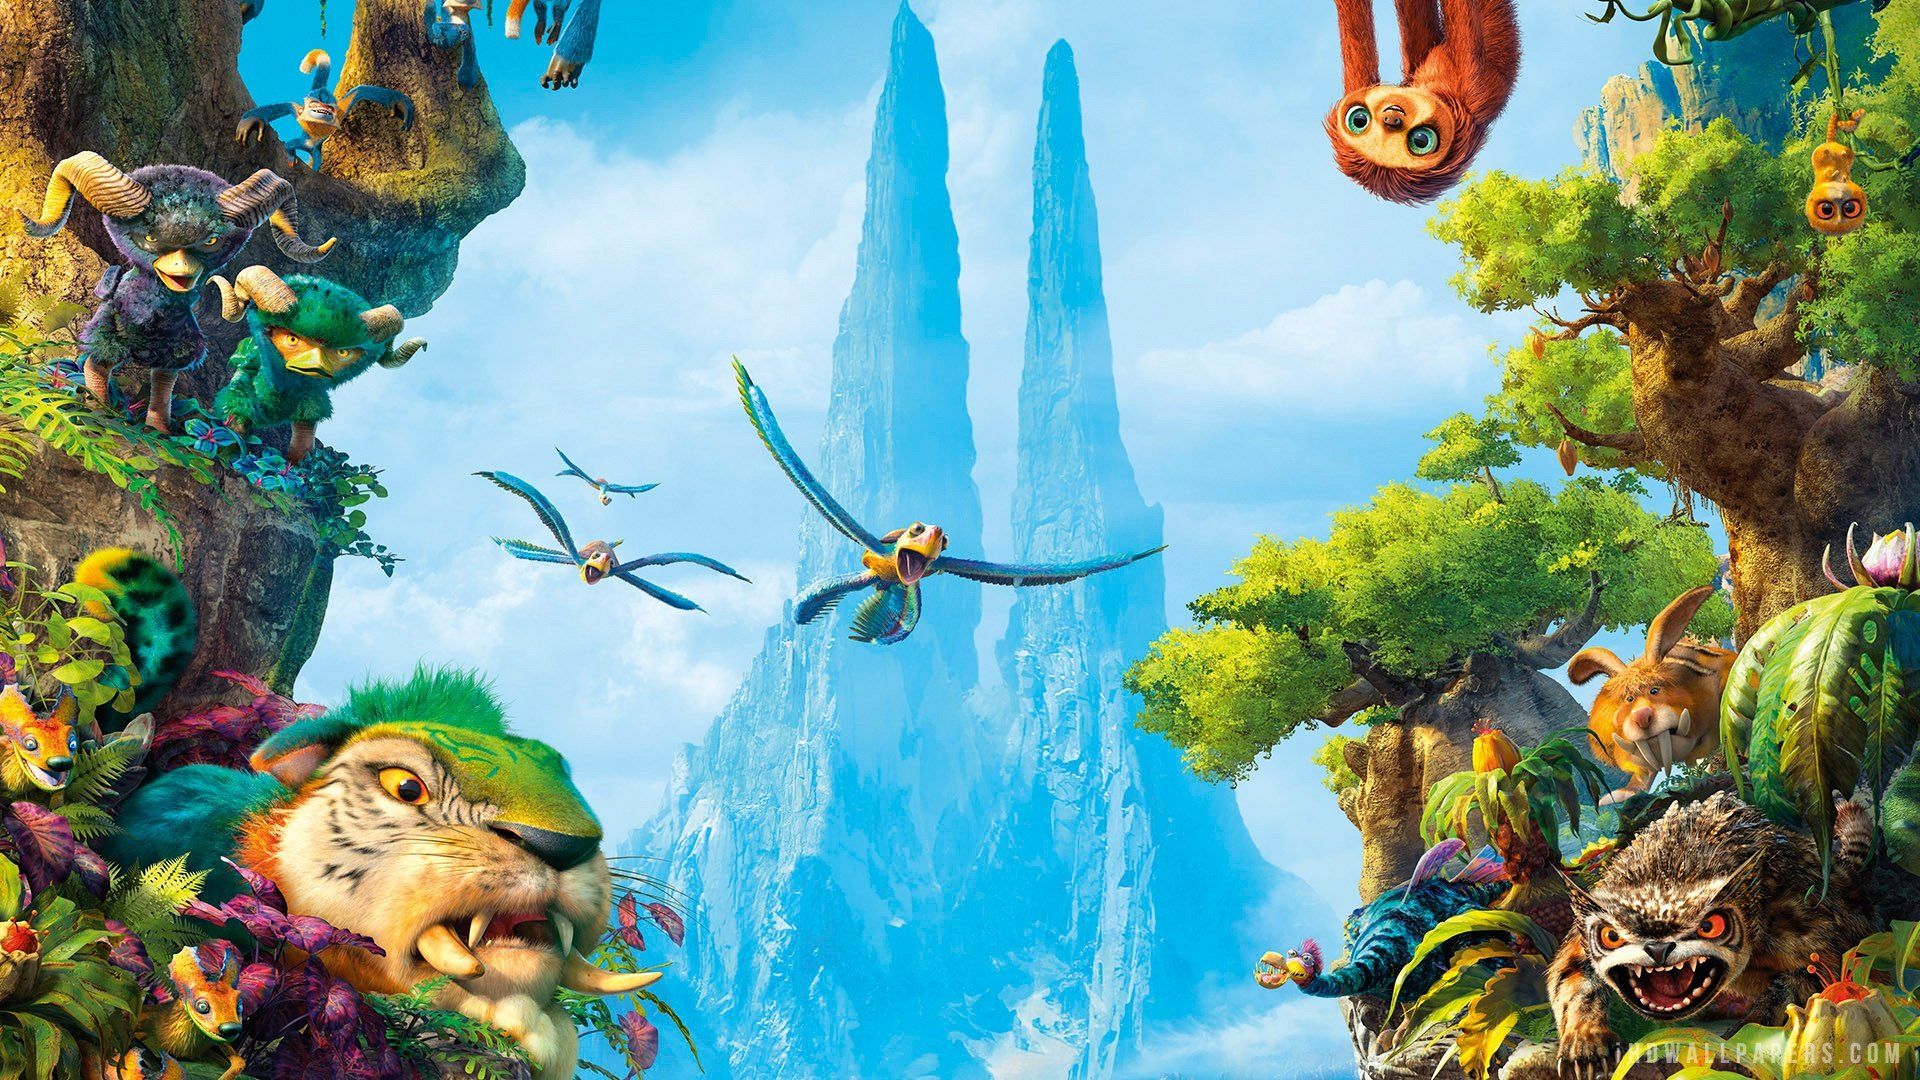 the, Croods, Animation, Adventure, Comedy, Family, Fantasy